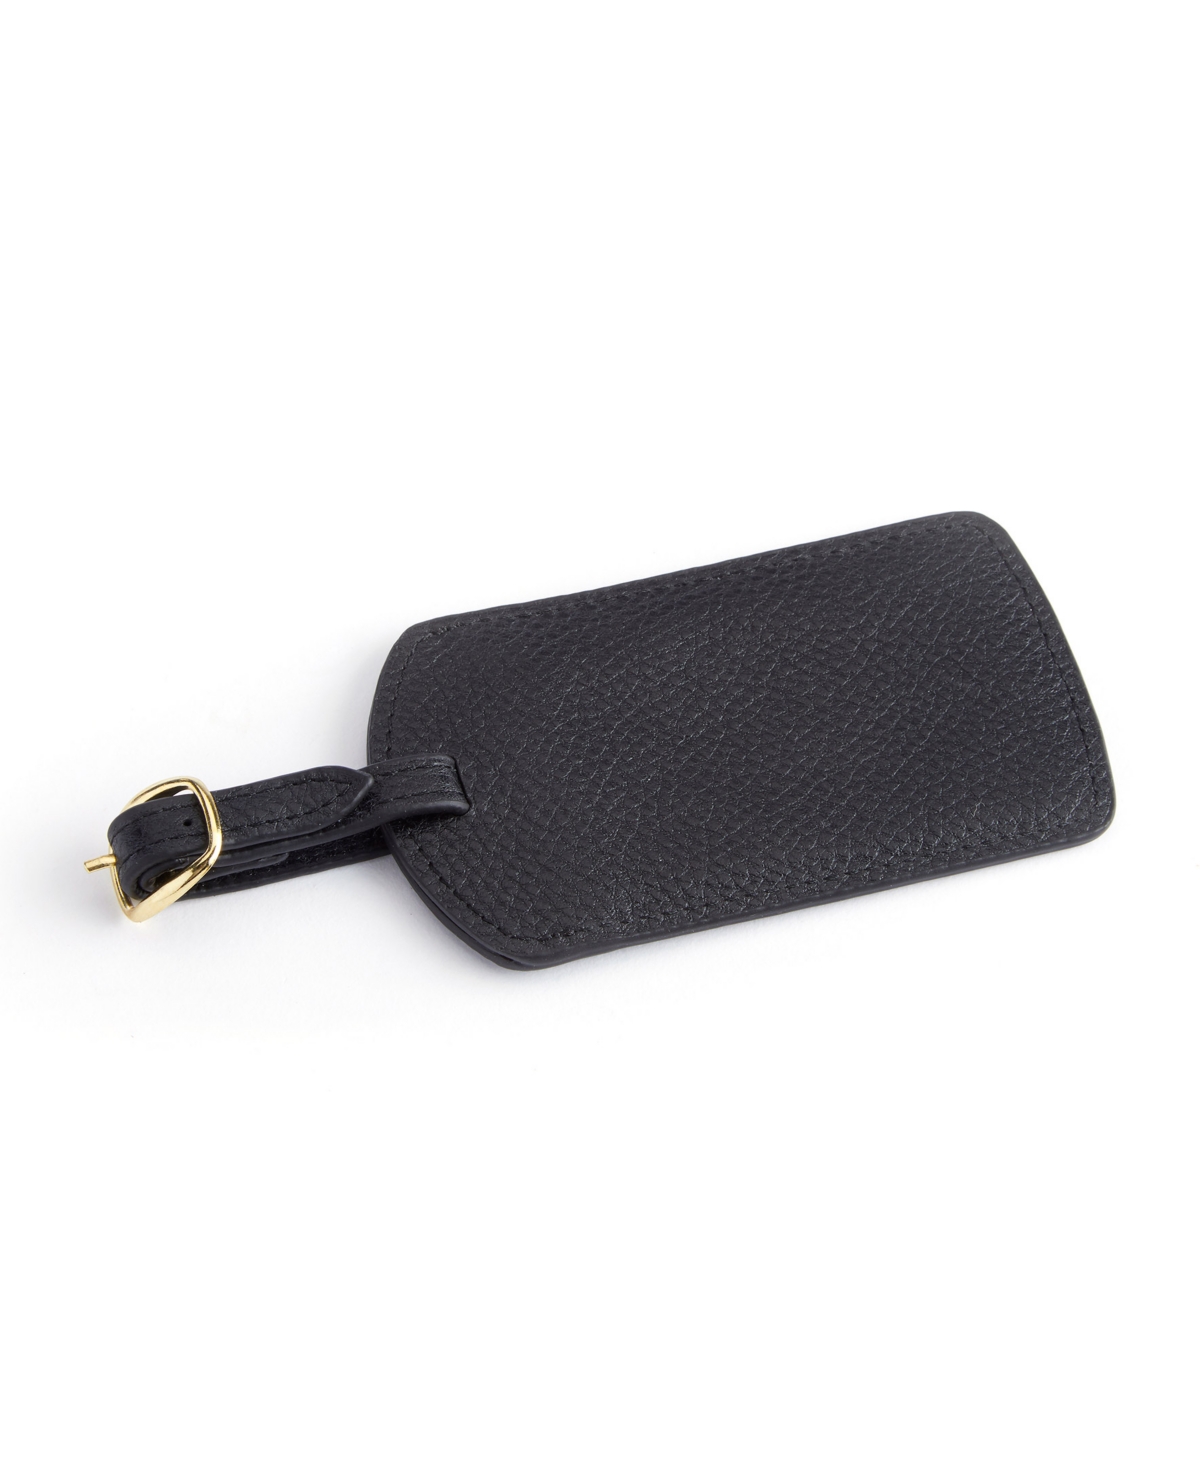 Luggage Tag with Gold Plated Hardware - Black